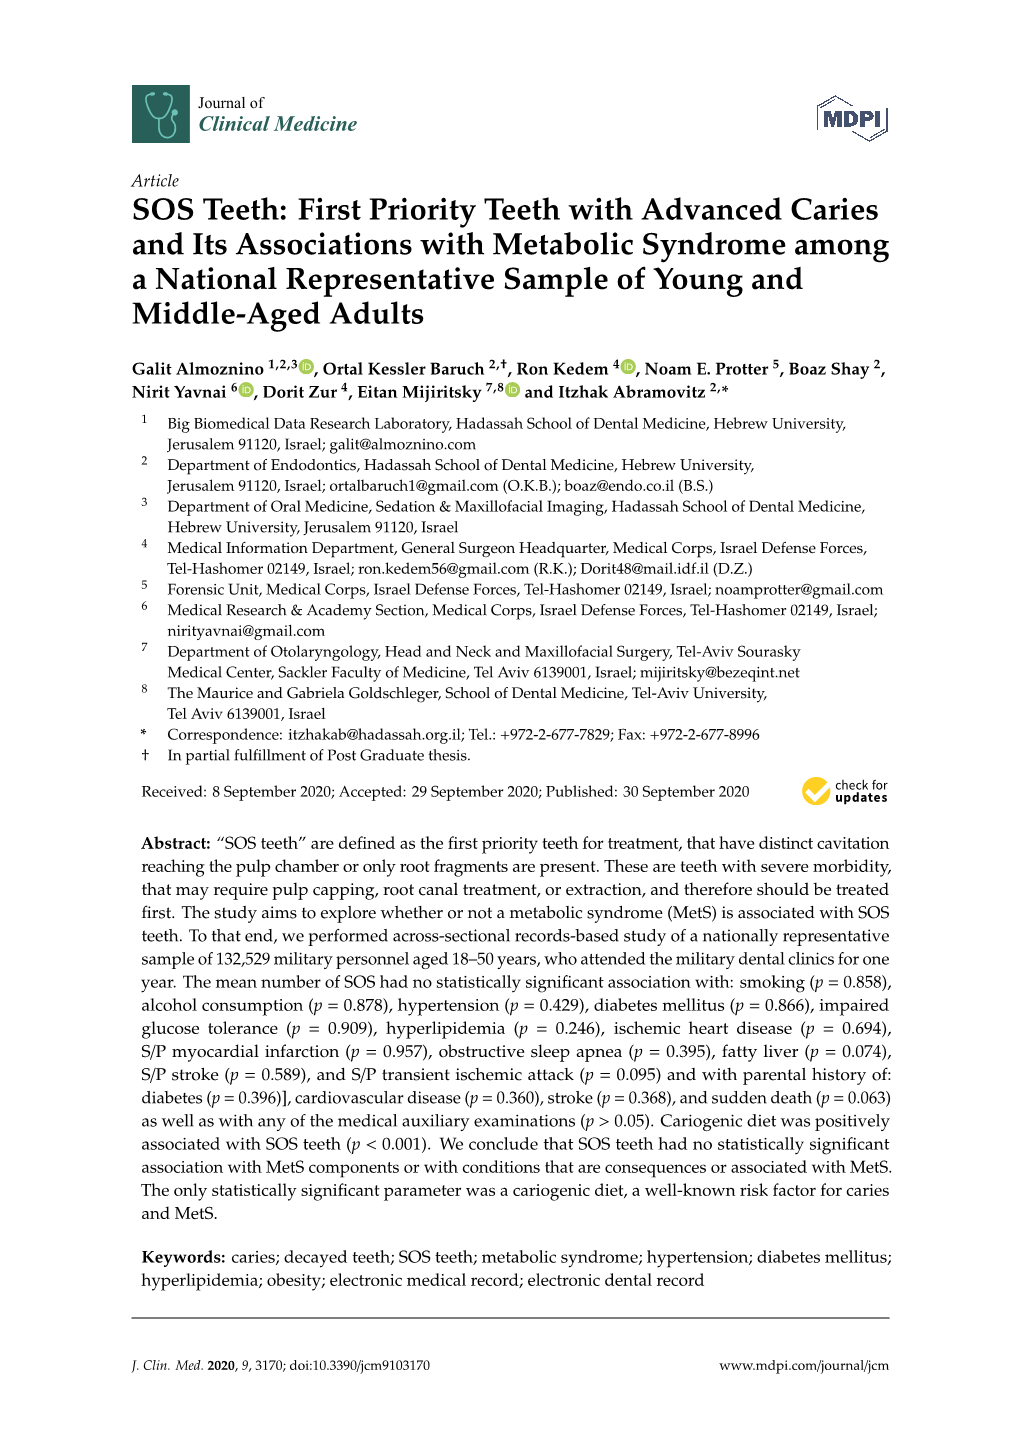 First Priority Teeth with Advanced Caries and Its Associations with Metabolic Syndrome Among a National Representative Sample of Young and Middle-Aged Adults